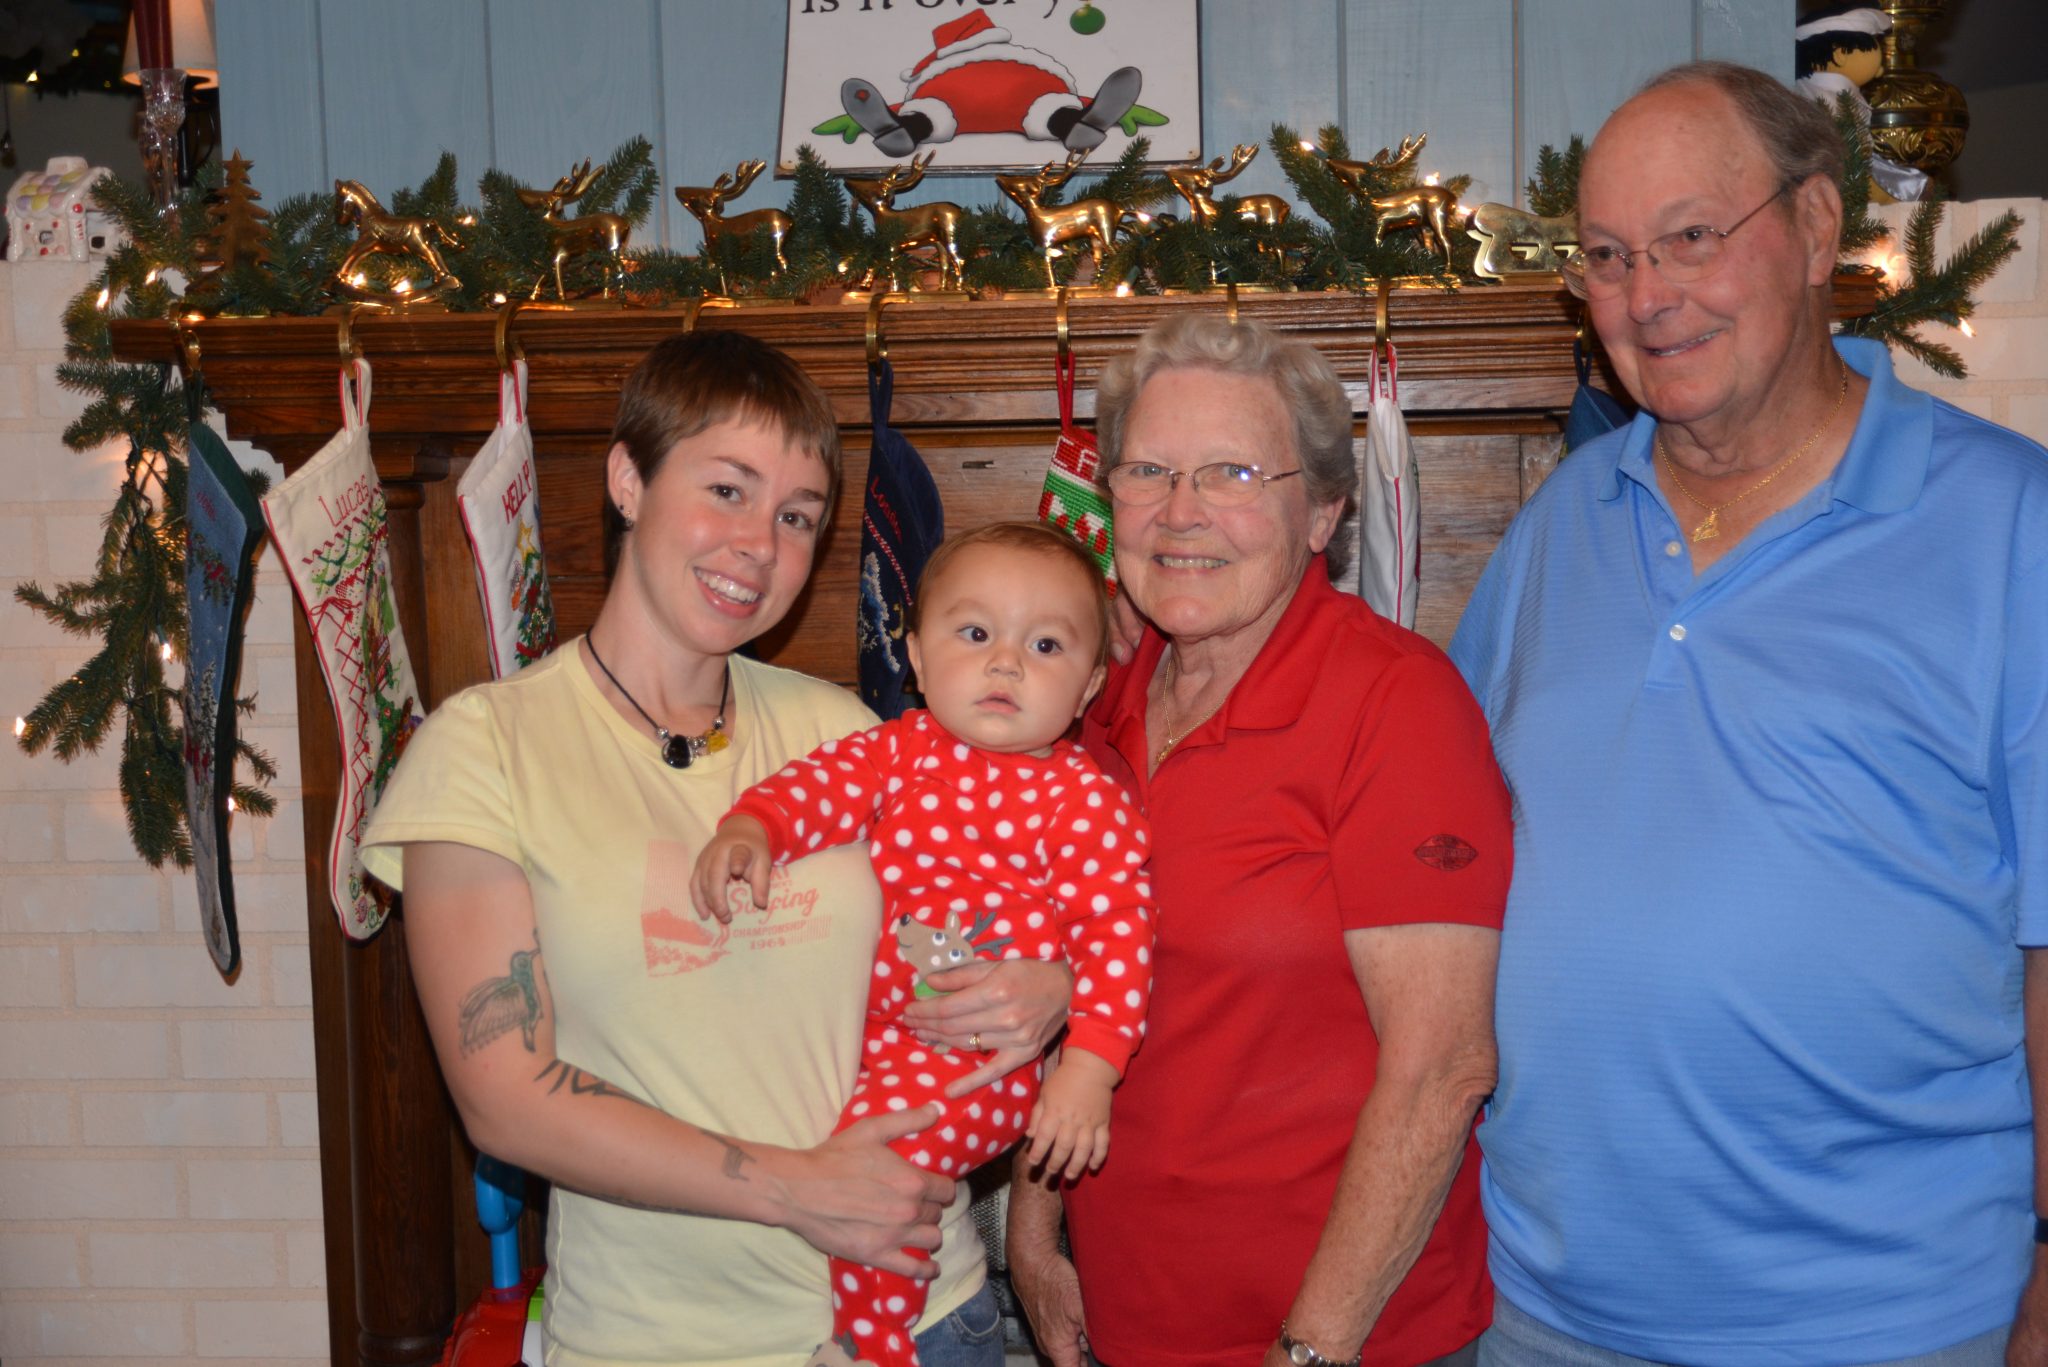 Christmas morning with Gramps, Grandma, Kelly and great-grandson Lucas.